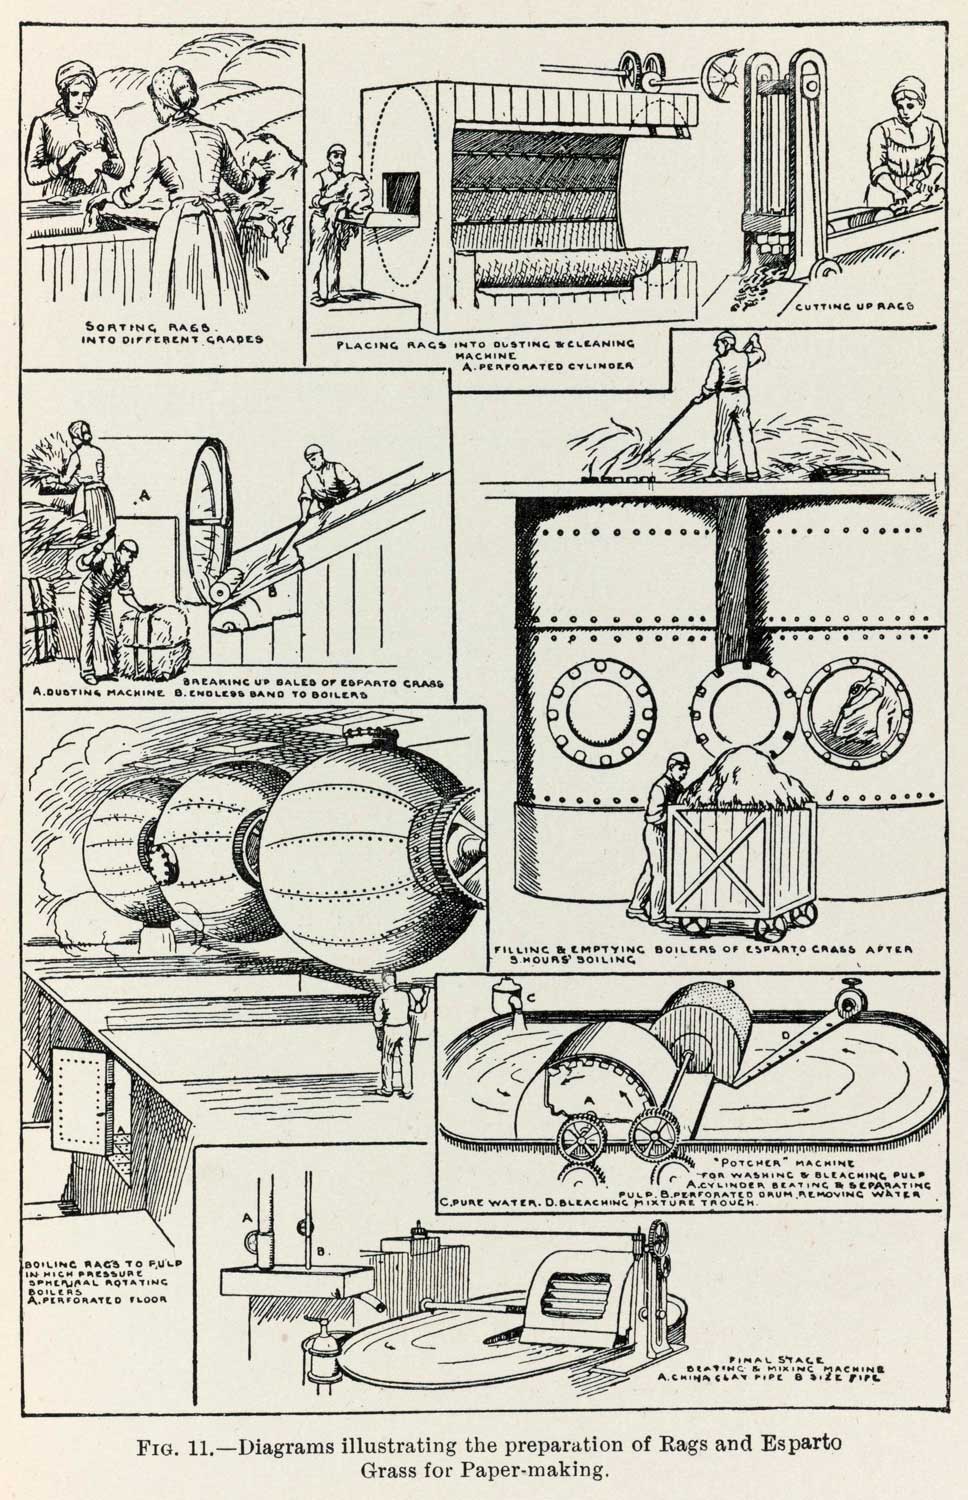 Illustration of the papermaking process